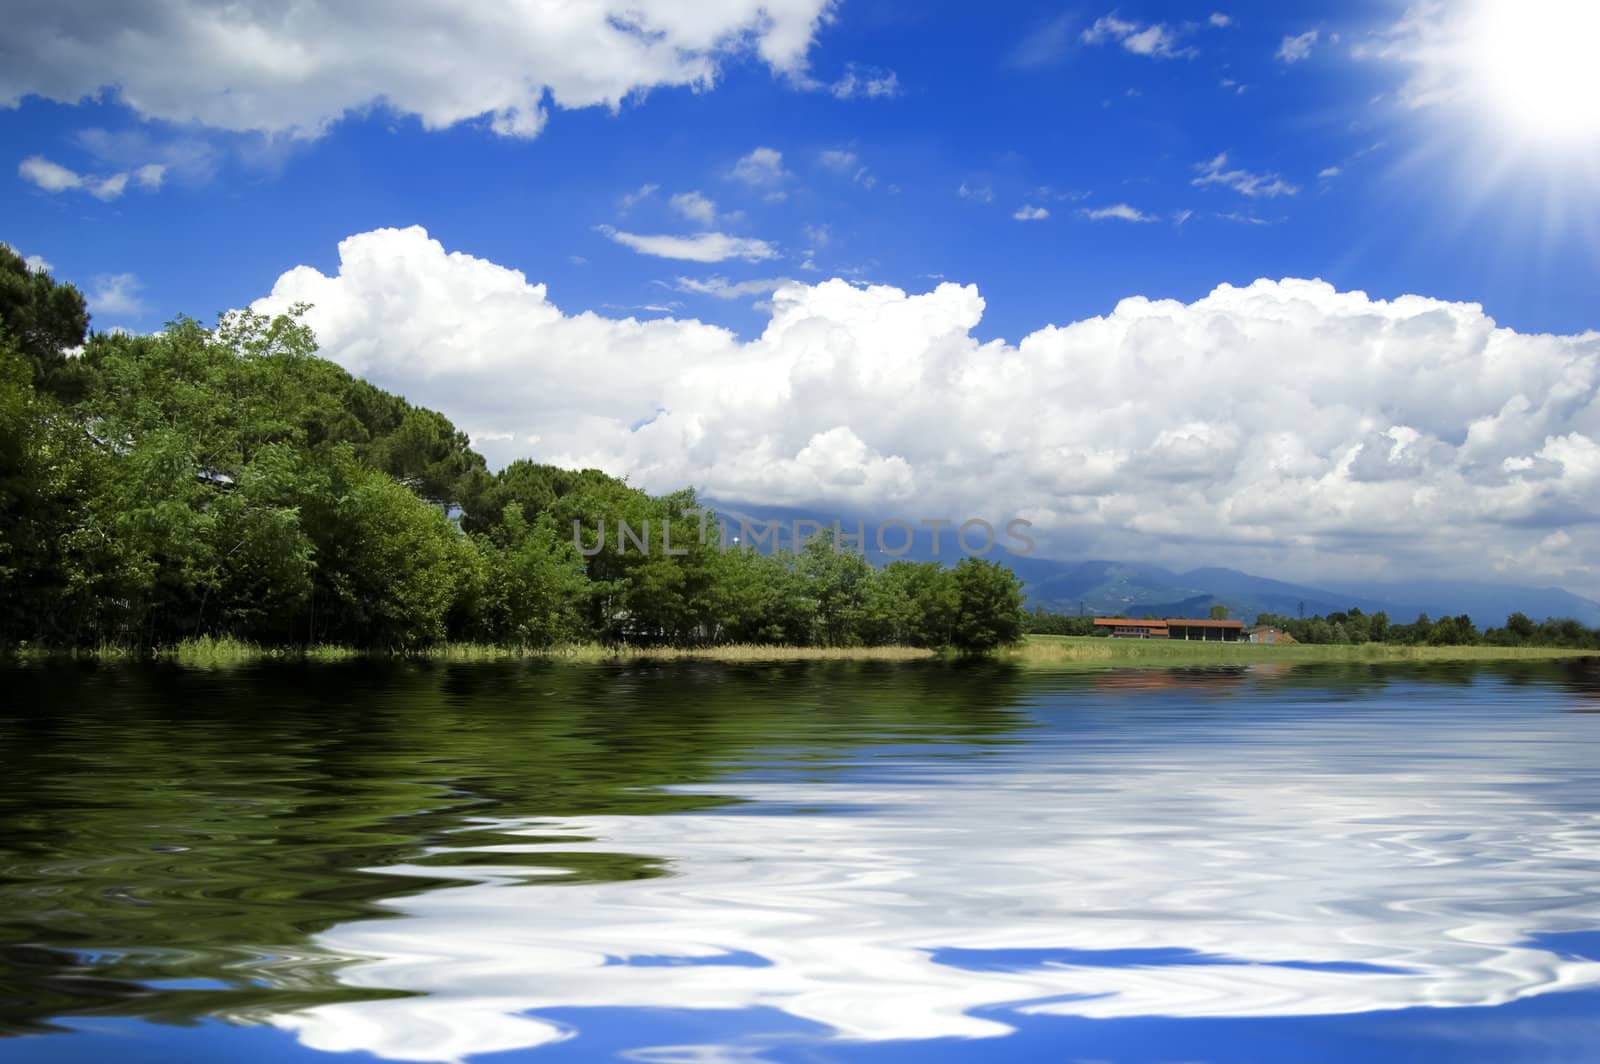 A scene of a lake and tree under a cloud blue sky